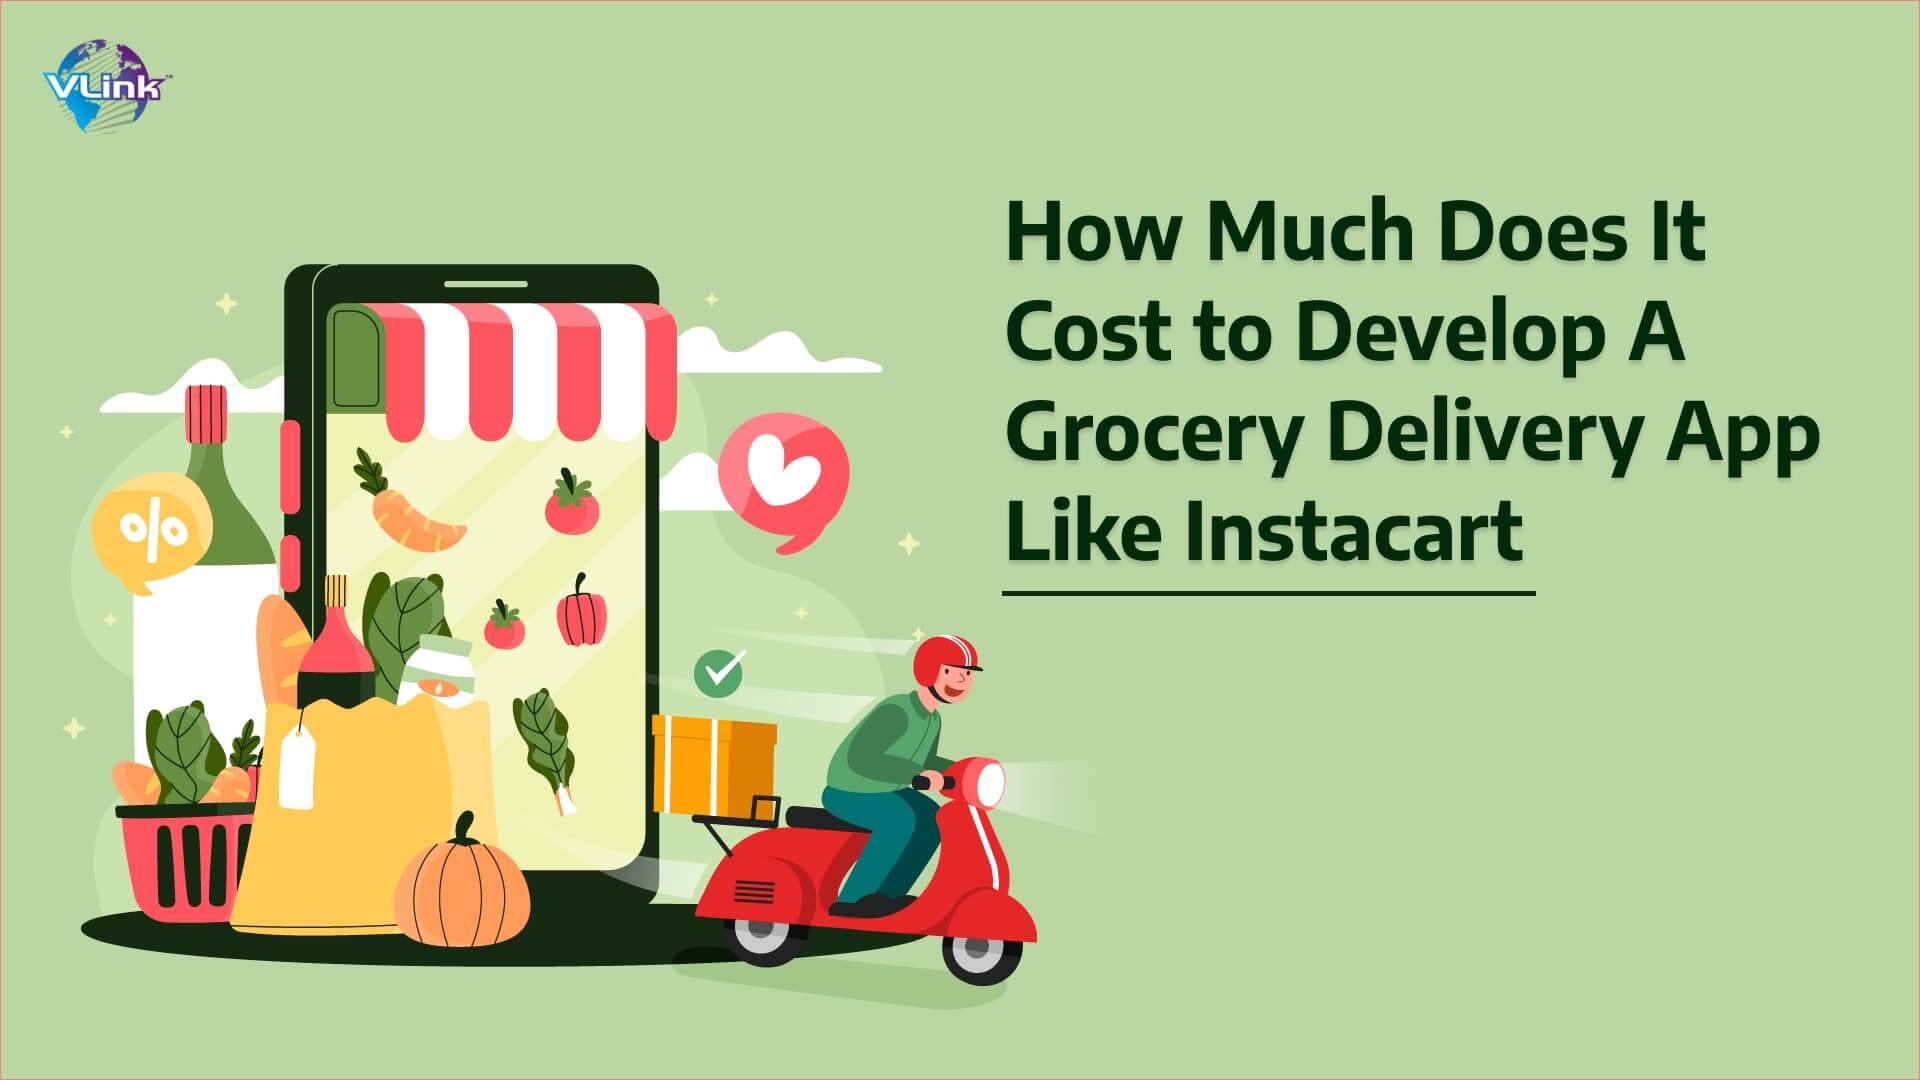 How Much Does It Cost to Develop a Grocery Delivery App Like Instacart?